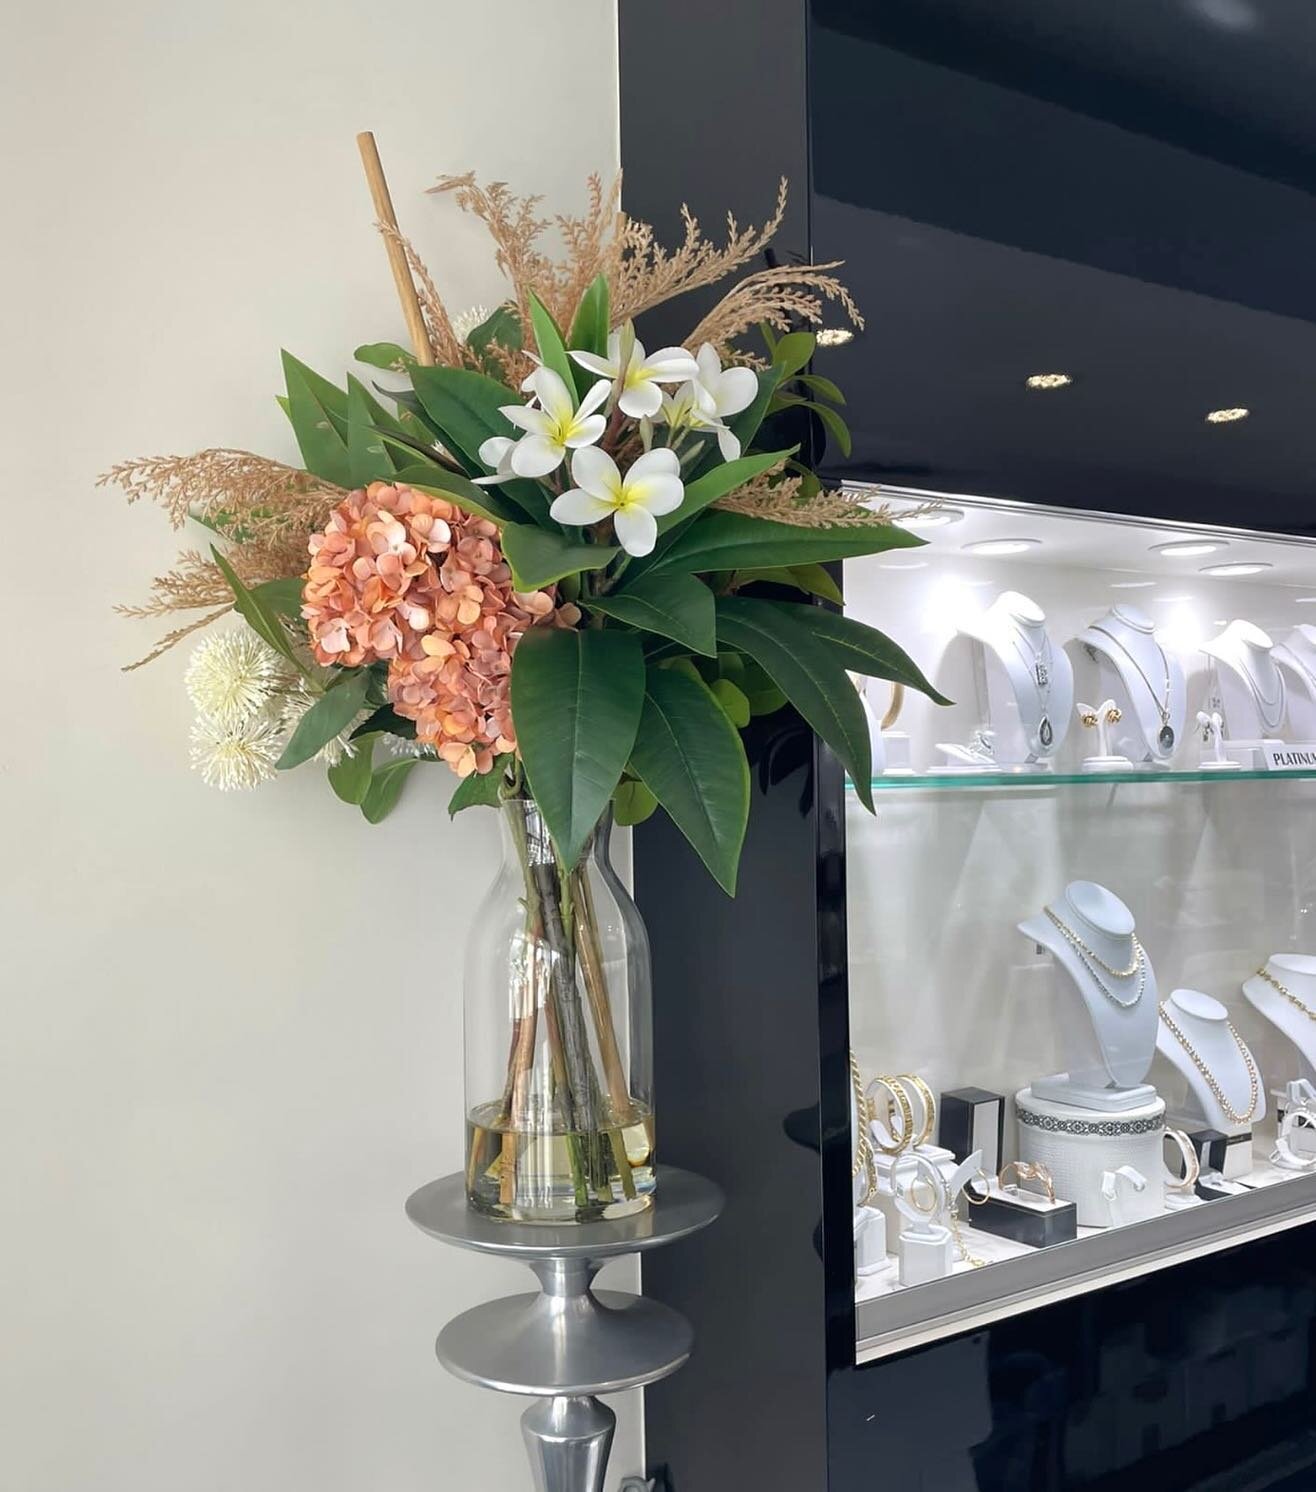 Flowers by Silk Flower Rentals 💐 
Call us and book in your free trial today 📞 1300 723 351⁠